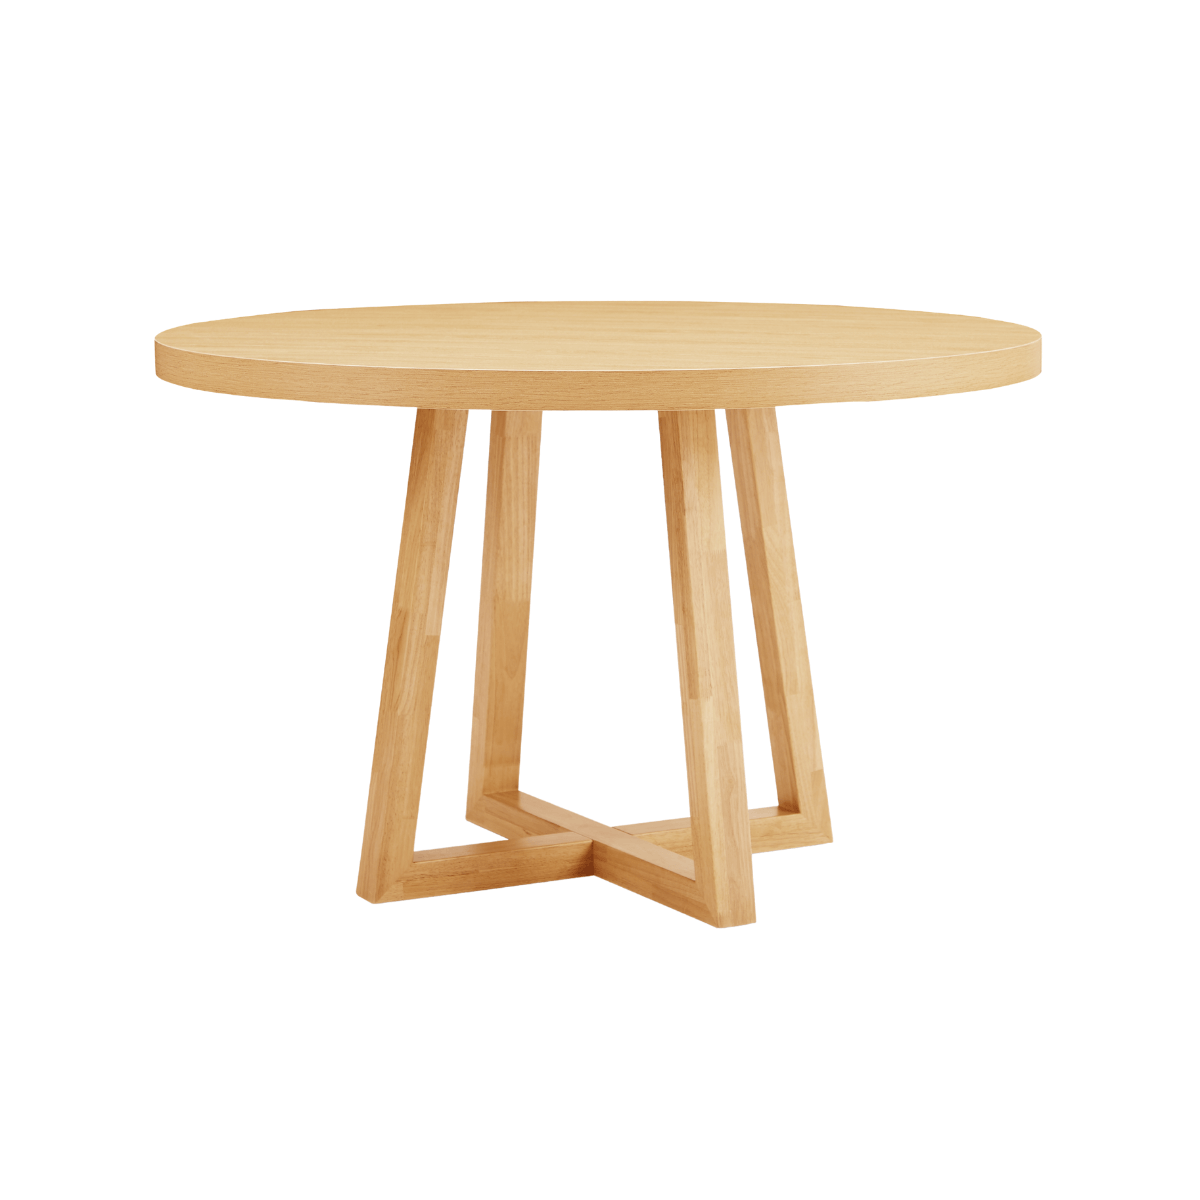 Harry 4 Seater Dining Table in Natural-Upinteriors